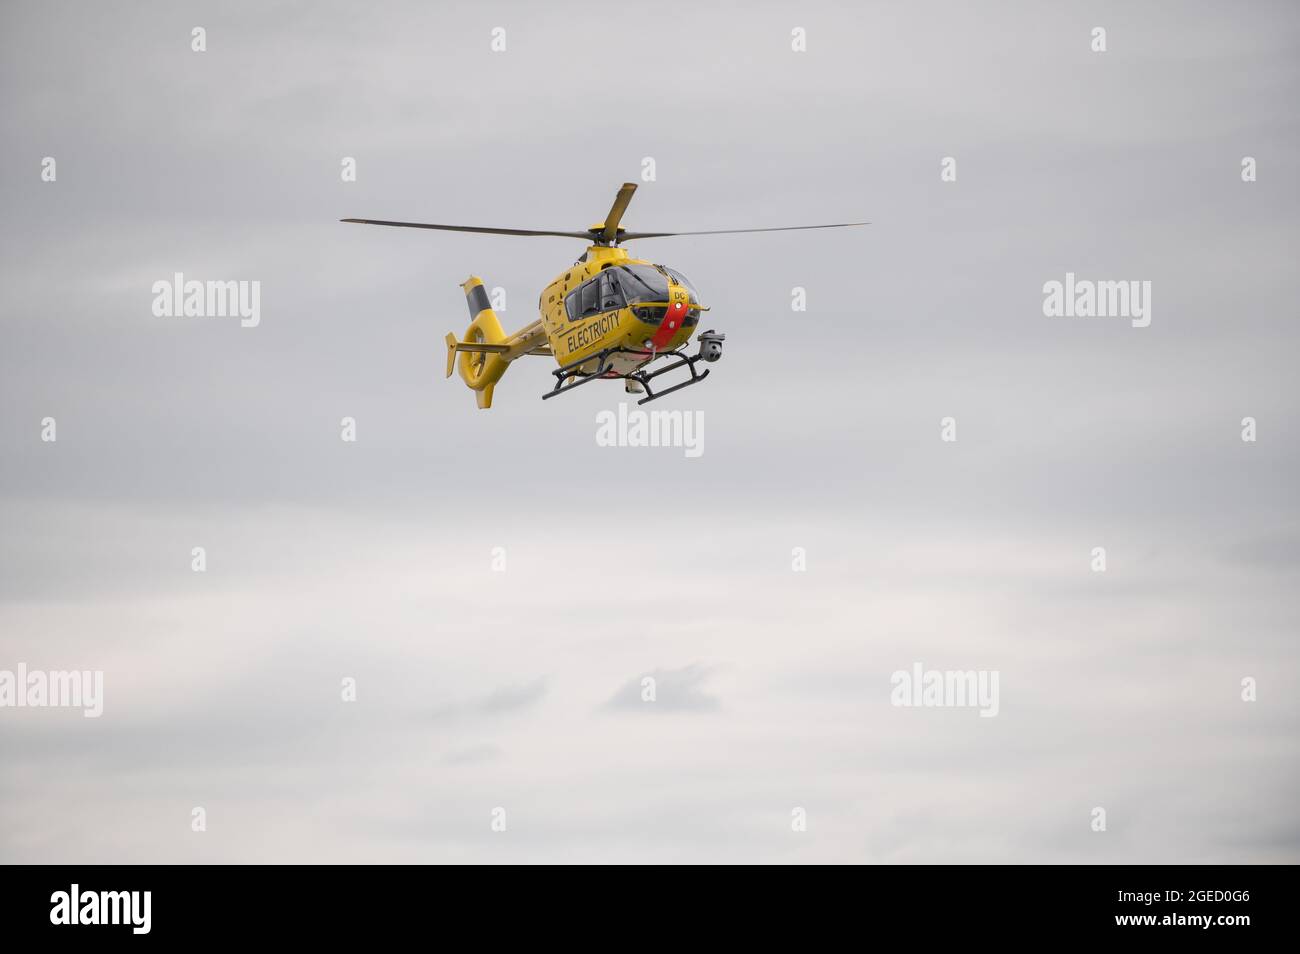 A helicopter run by the UK's National Grid electricity supply making routine inspections over Warwickshire, UK. Stock Photo